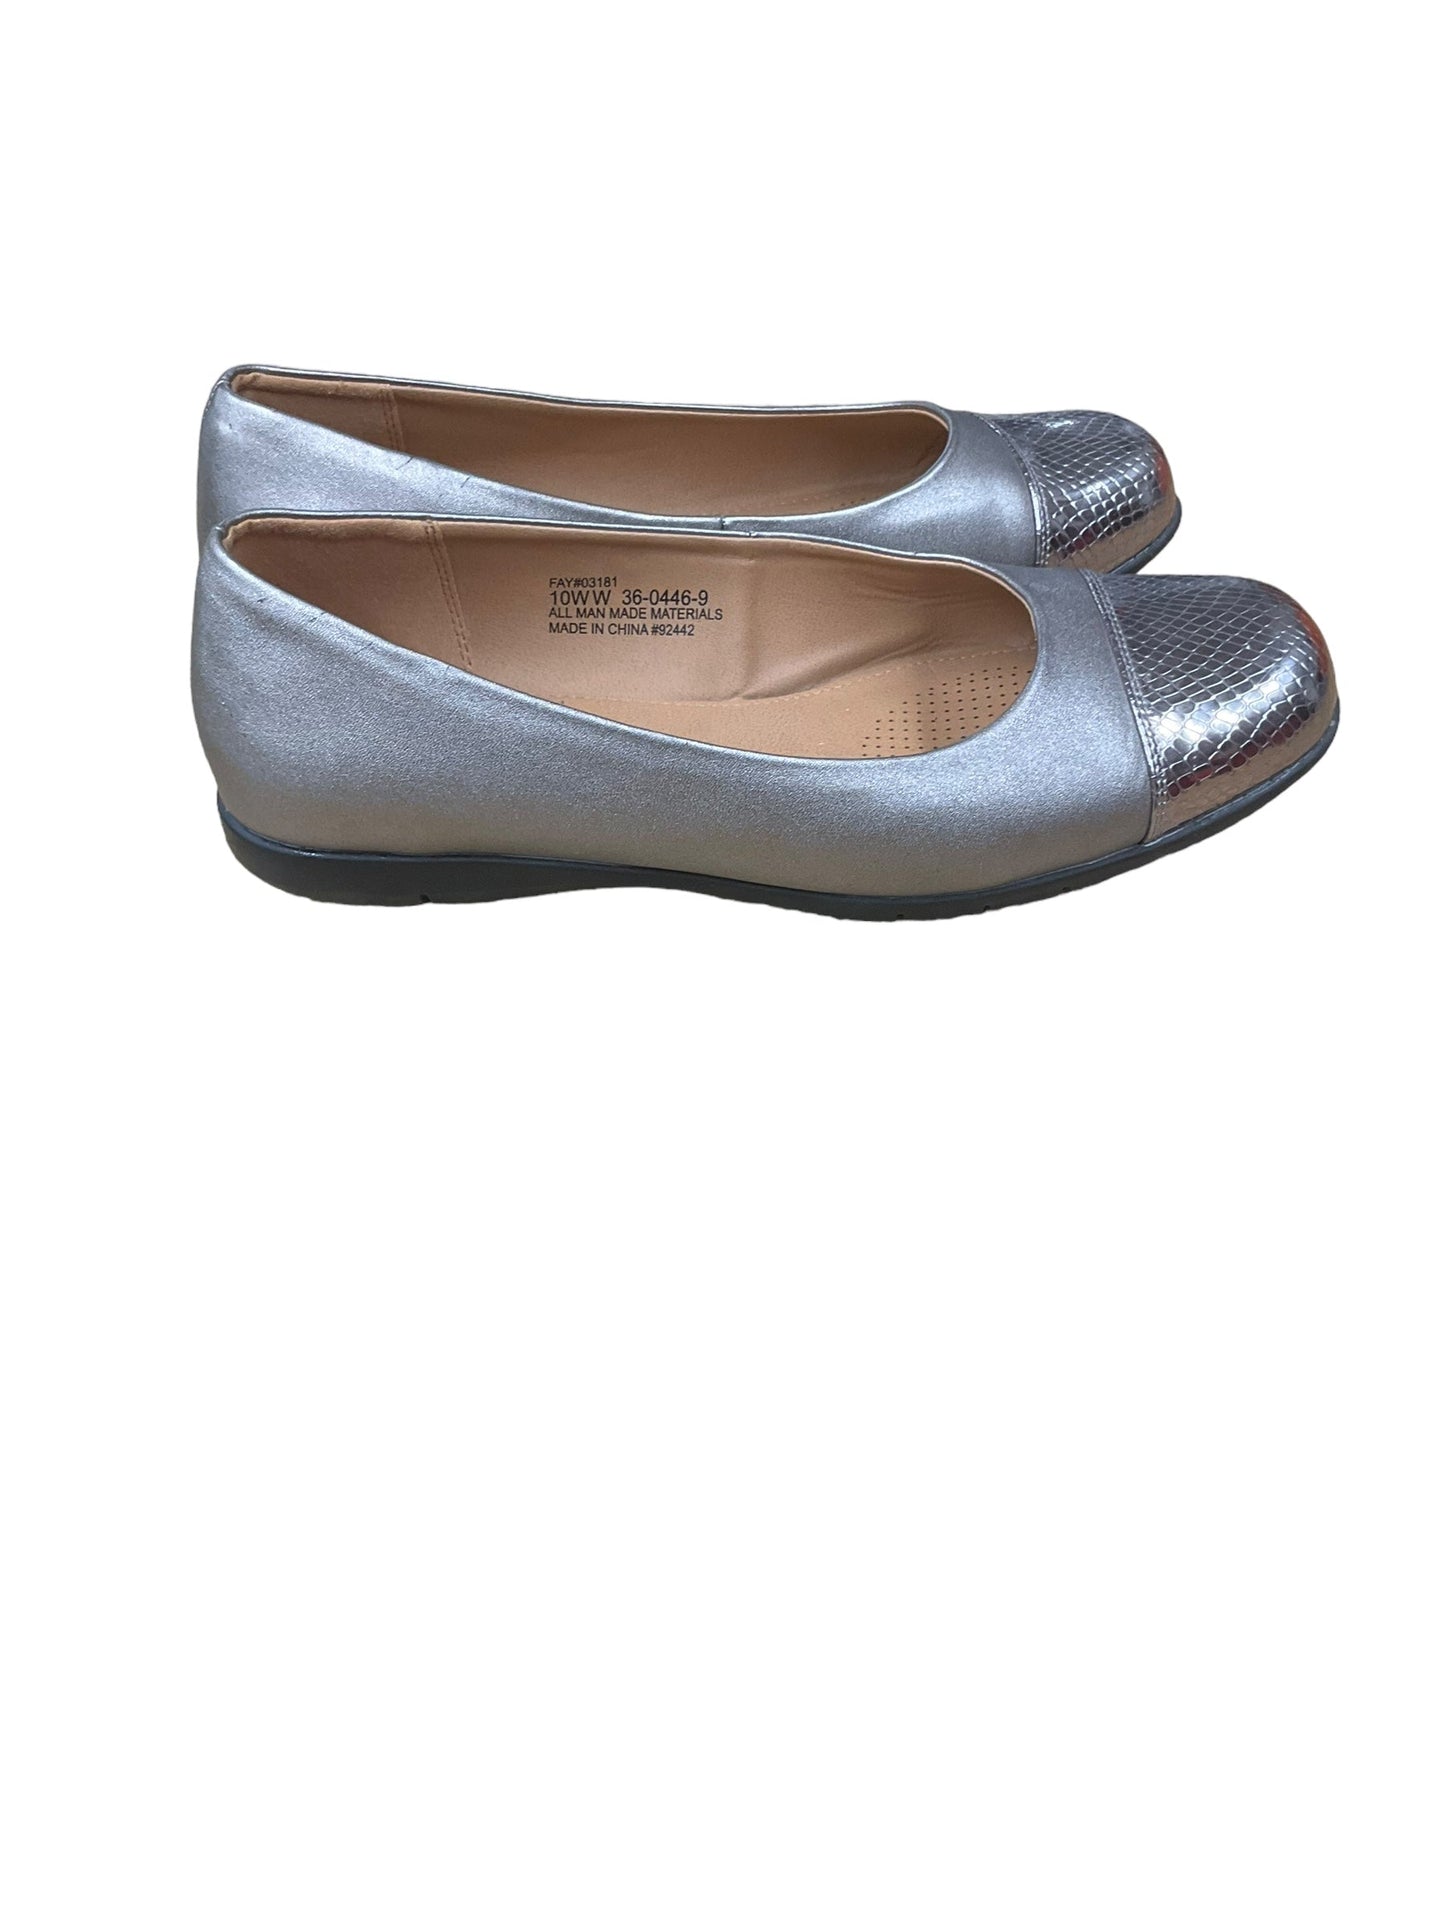 Silver Shoes Flats Comfortview, Size 10